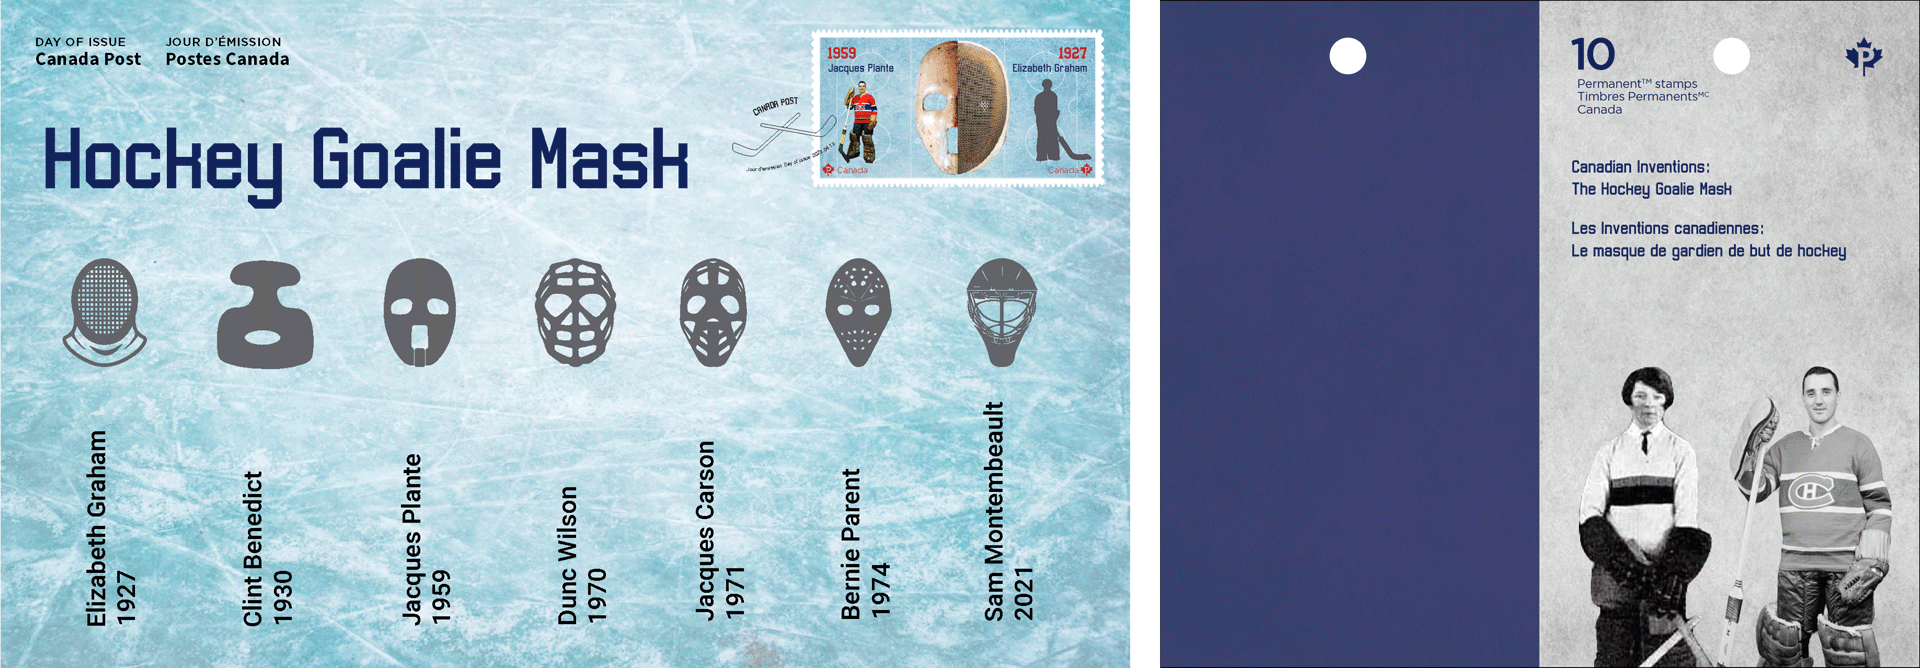 An image of Official First Day Cover (left) and a booklet (right) in gif of Canada Post stamps celebrating the hockey goalie mask.